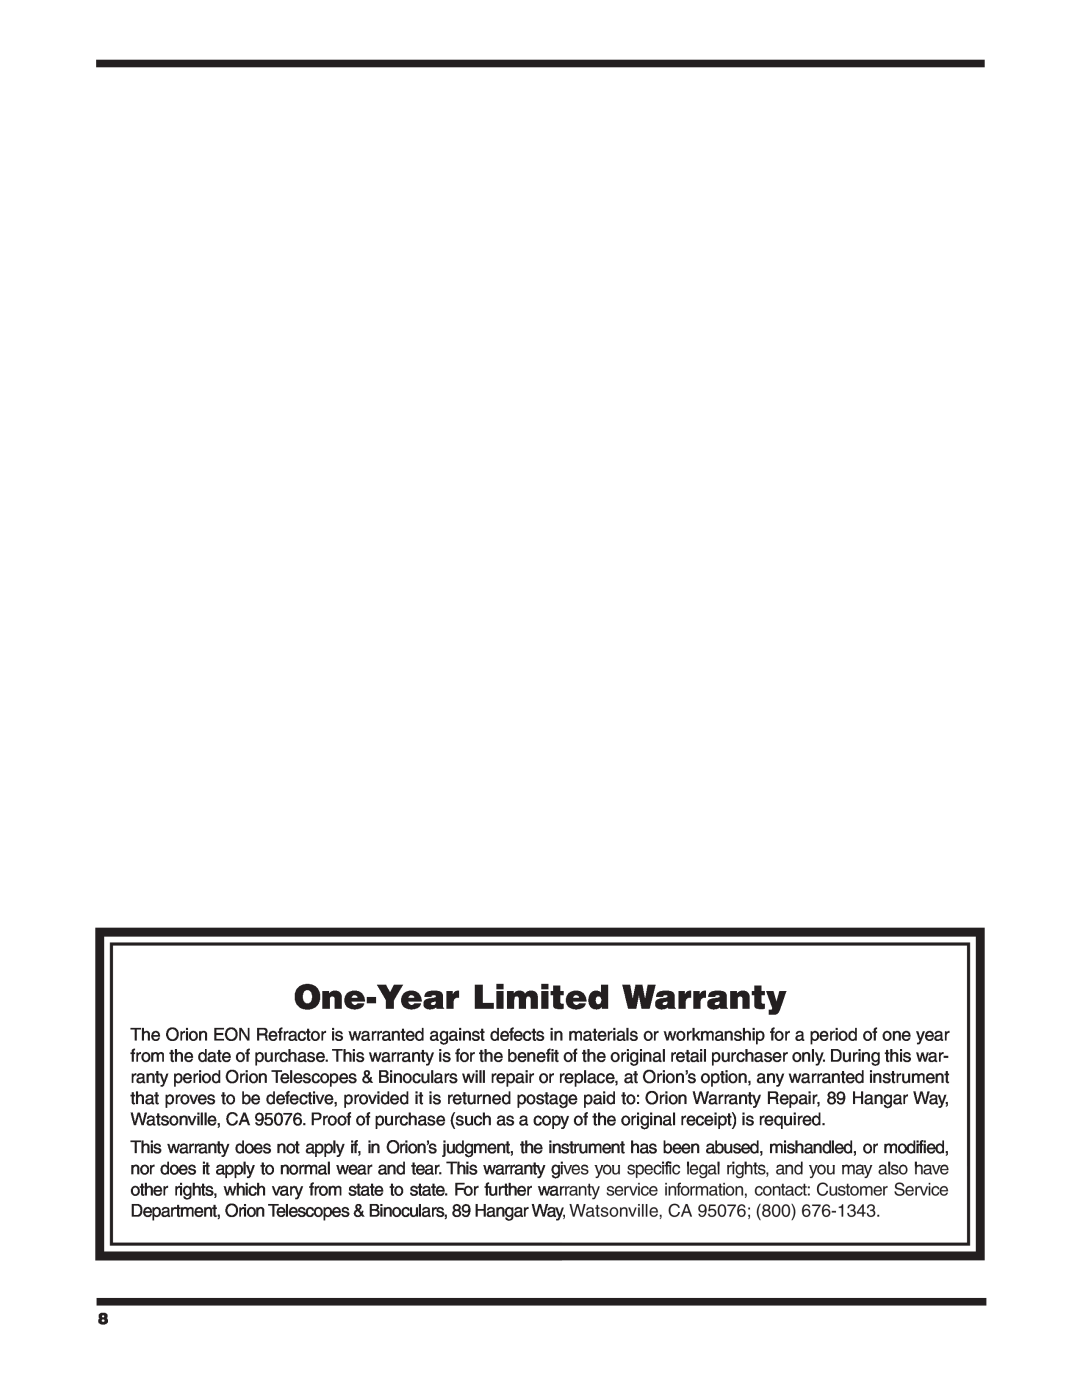 Orion 9925, 9781, 9927 instruction manual One-Year Limited Warranty 